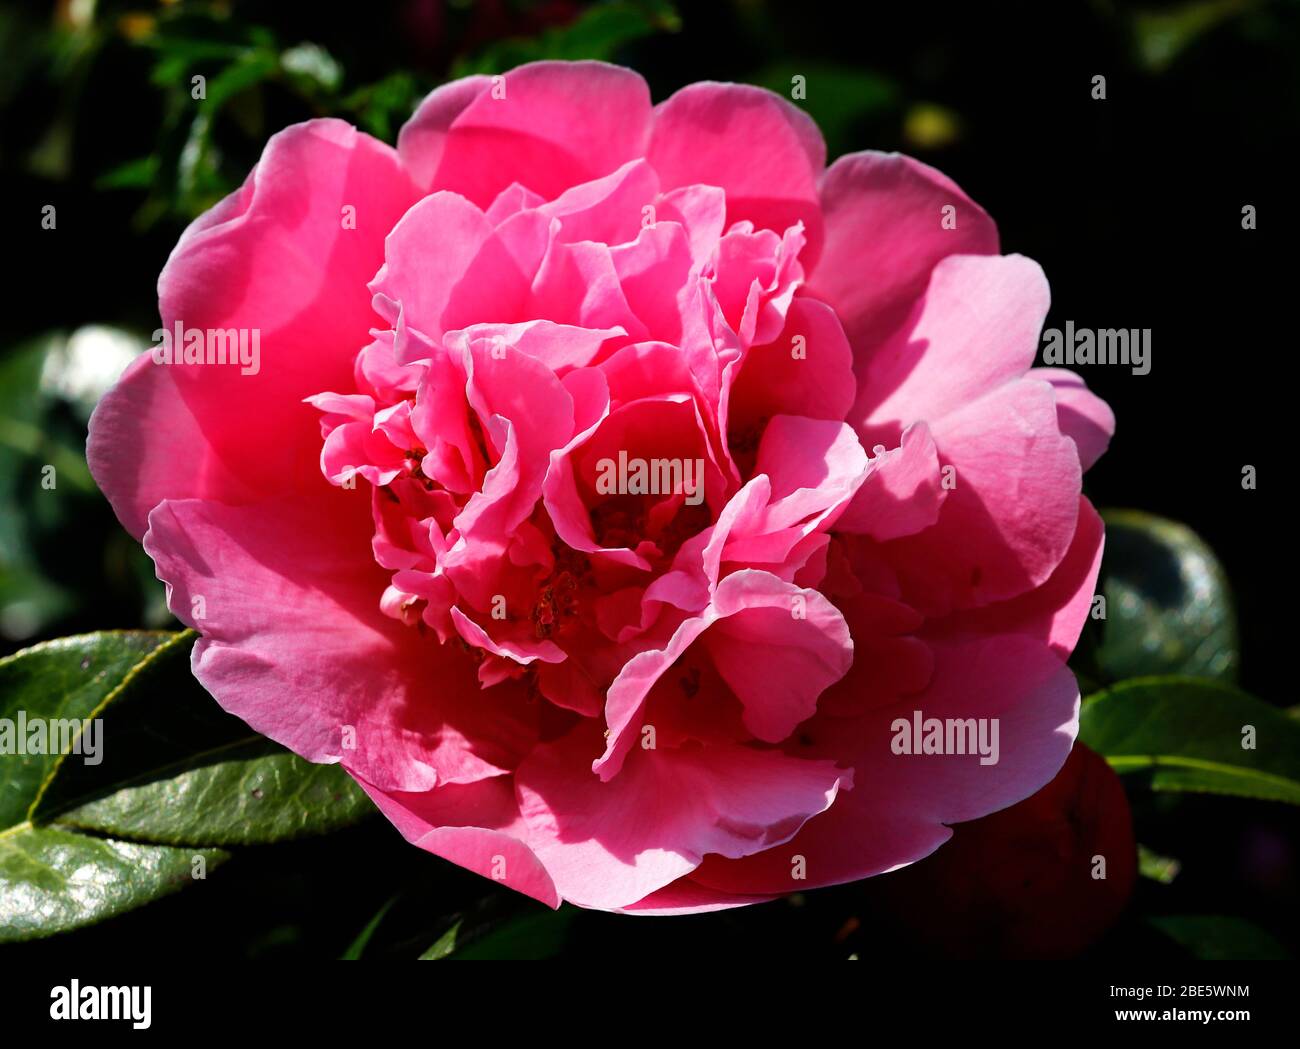 Rhododendron Azalea Flower Border High Resolution Stock and Images - Alamy